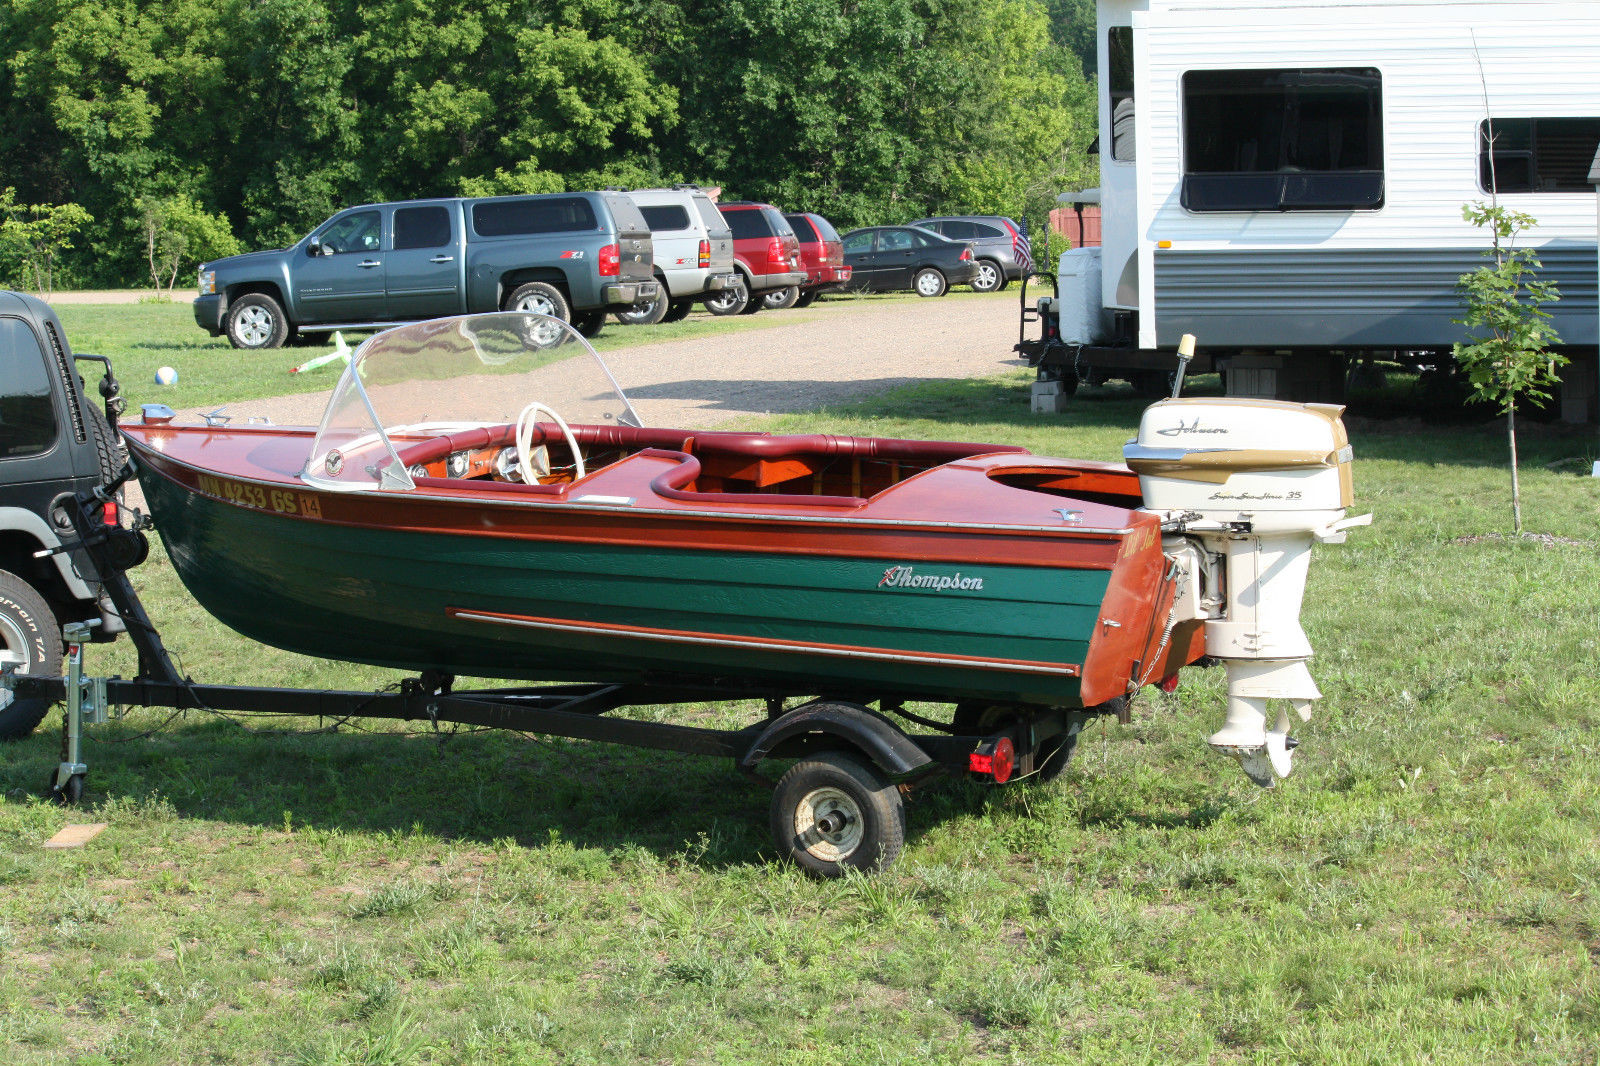 Thompson Boat Works Baby Sea Skiff 1958 for sale for 